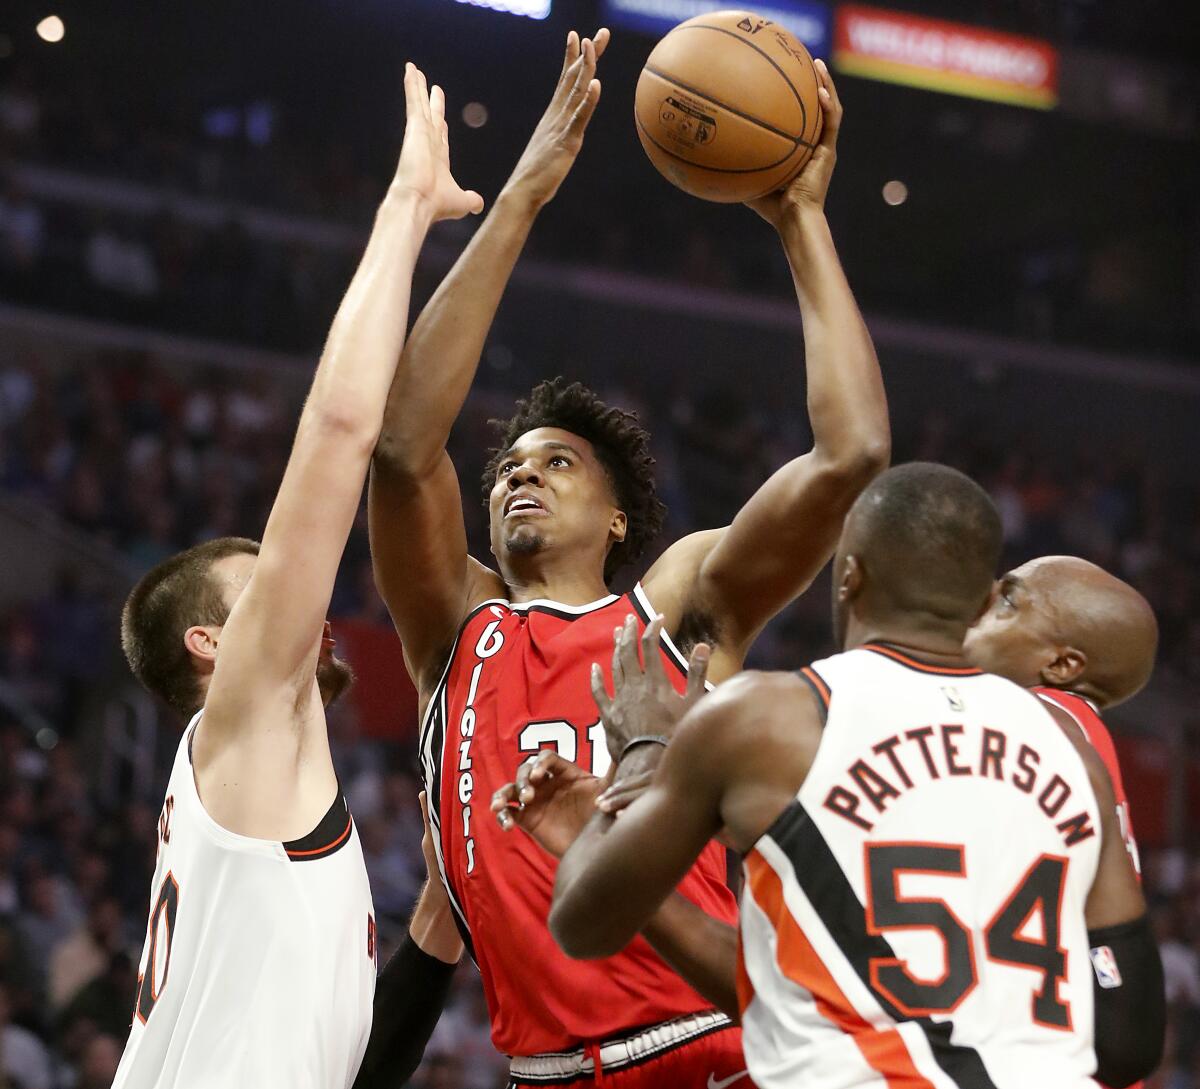 Portland Trail Blazers center Hassan Whiteside goes the basket against Clippers center Ivaca Zubac, left, and forward Patrick Patterson in the second quarter at Staples Center on Wednesday.